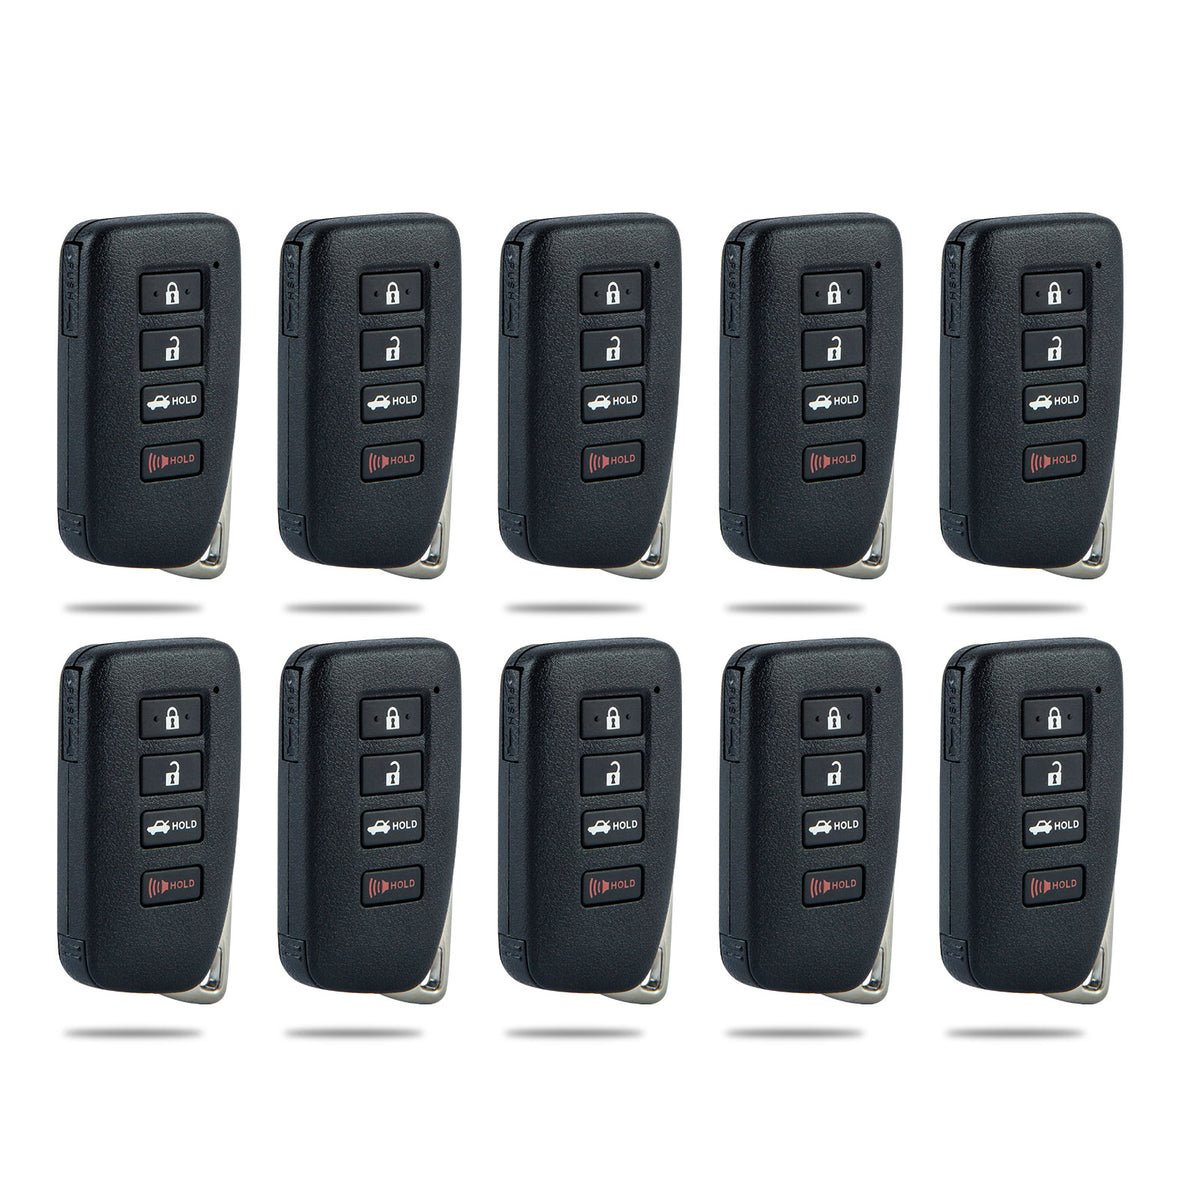 Lots of 10 Smart Car Key Fob Replacement for Lexus GS450H GS350 ES350 ES300H fits 2013 2014 2015 2016 2017 Proximity 4 Button Remote HYQ14FBA 0020 'G' Board